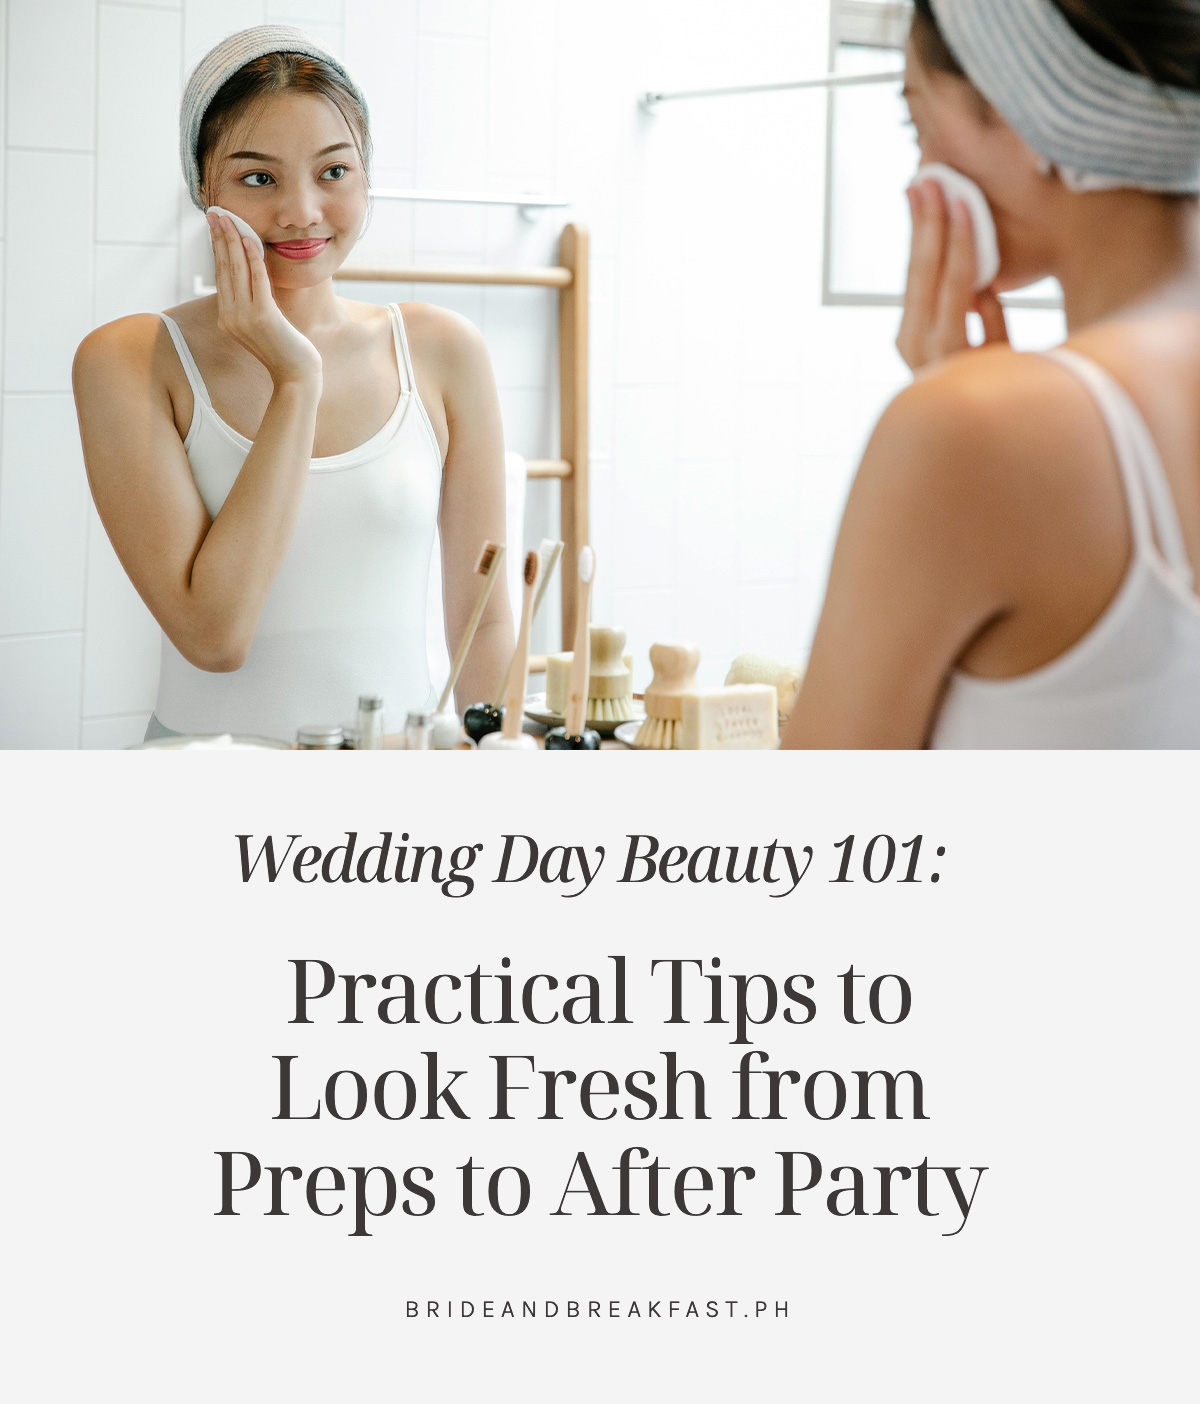 Wedding Day Beauty 101: Practical Tips to Look Fresh from Preps to After Party